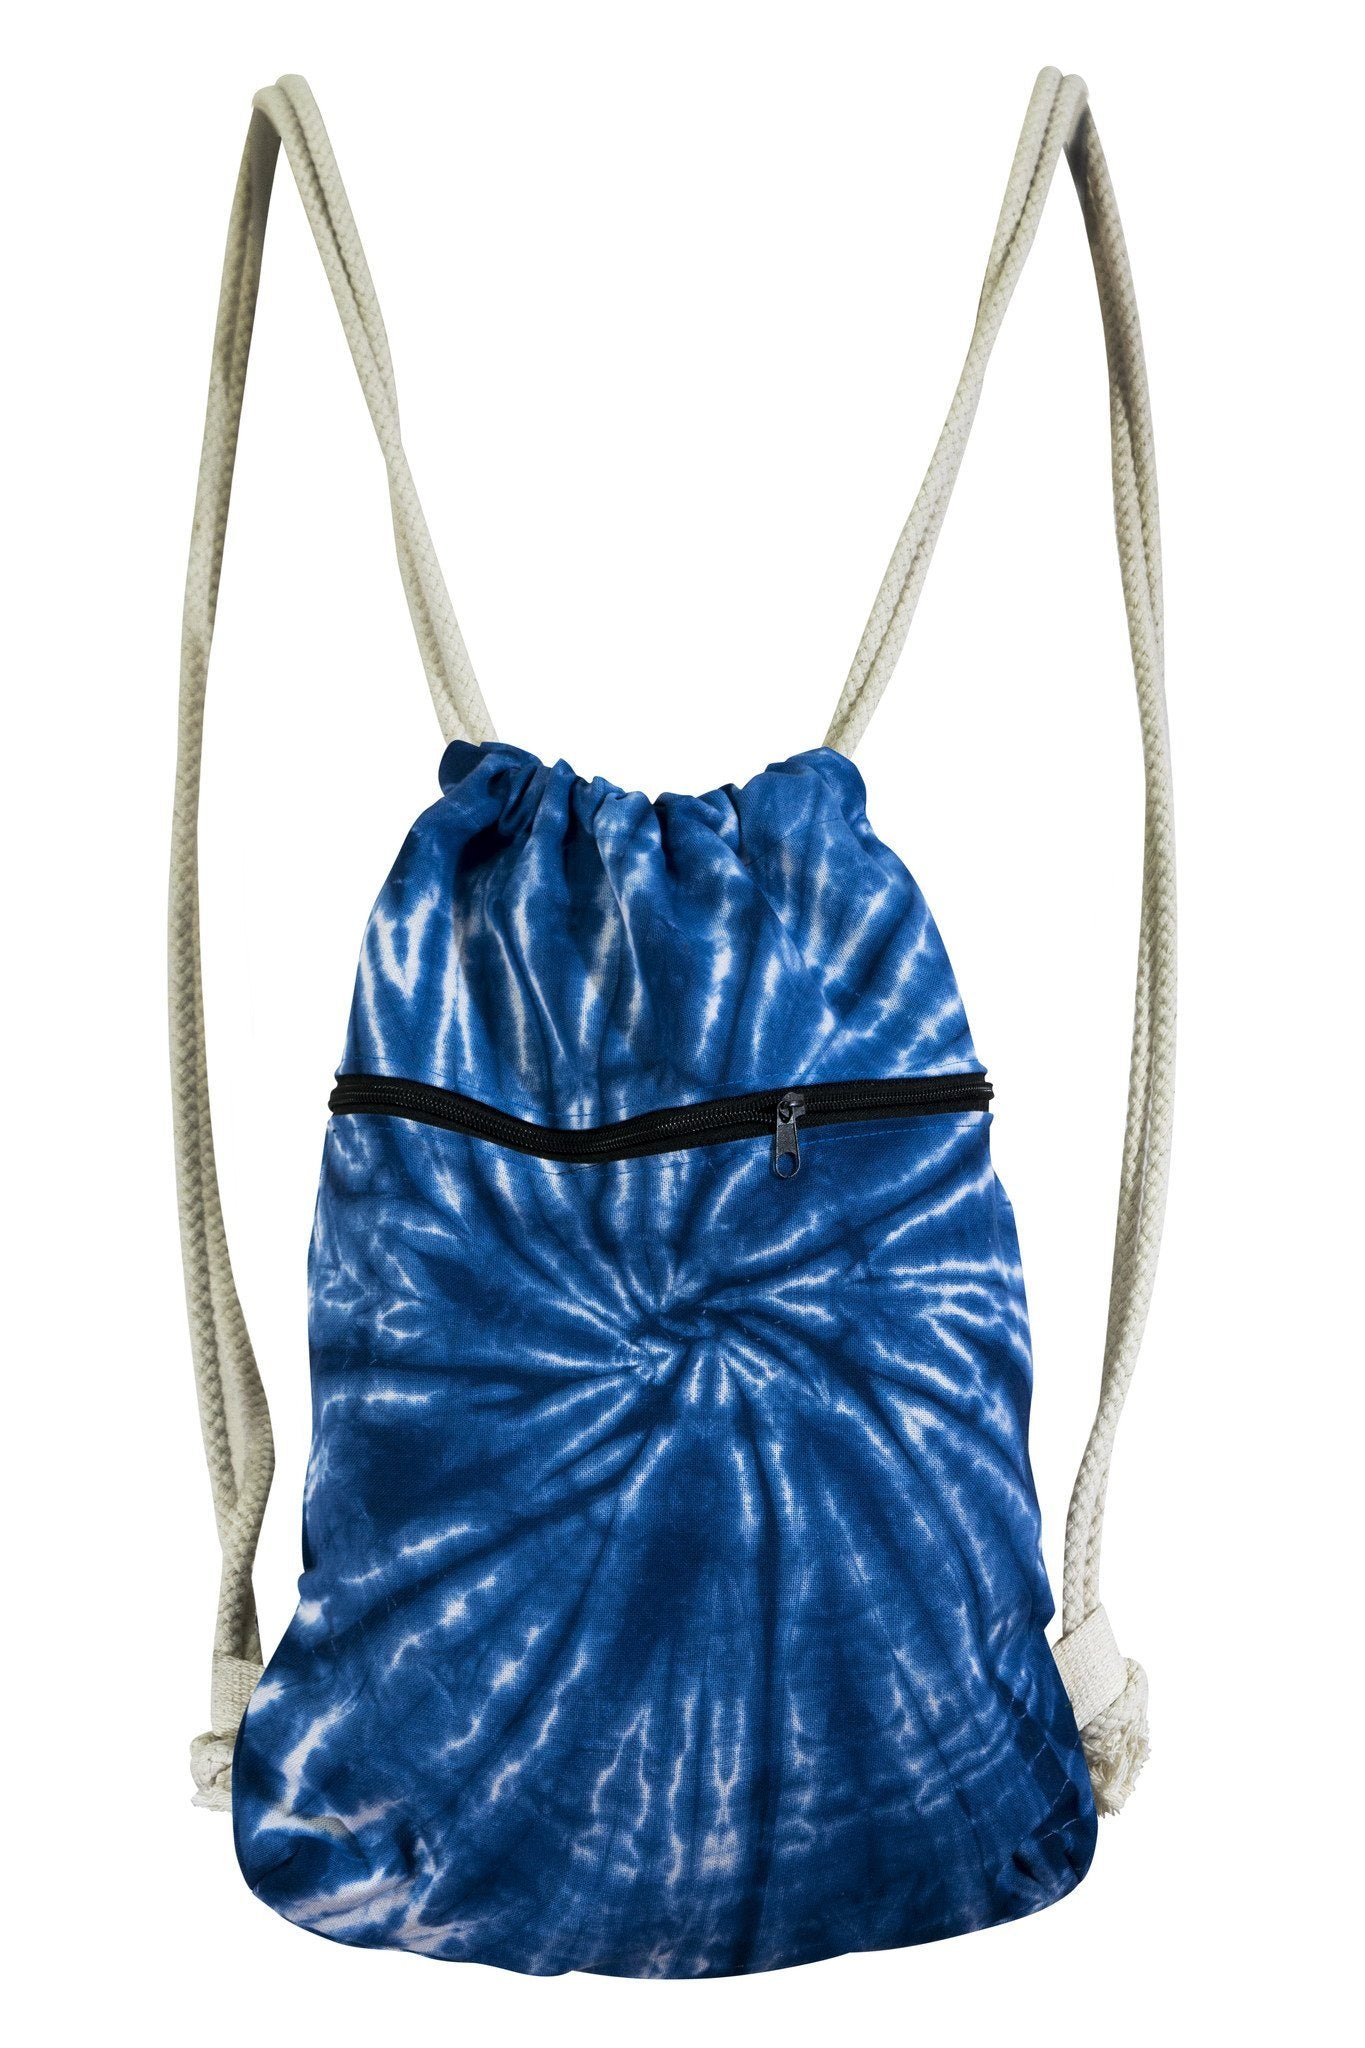 Tie Dye Duffle Bag Drawstring Backpack - CCCollections